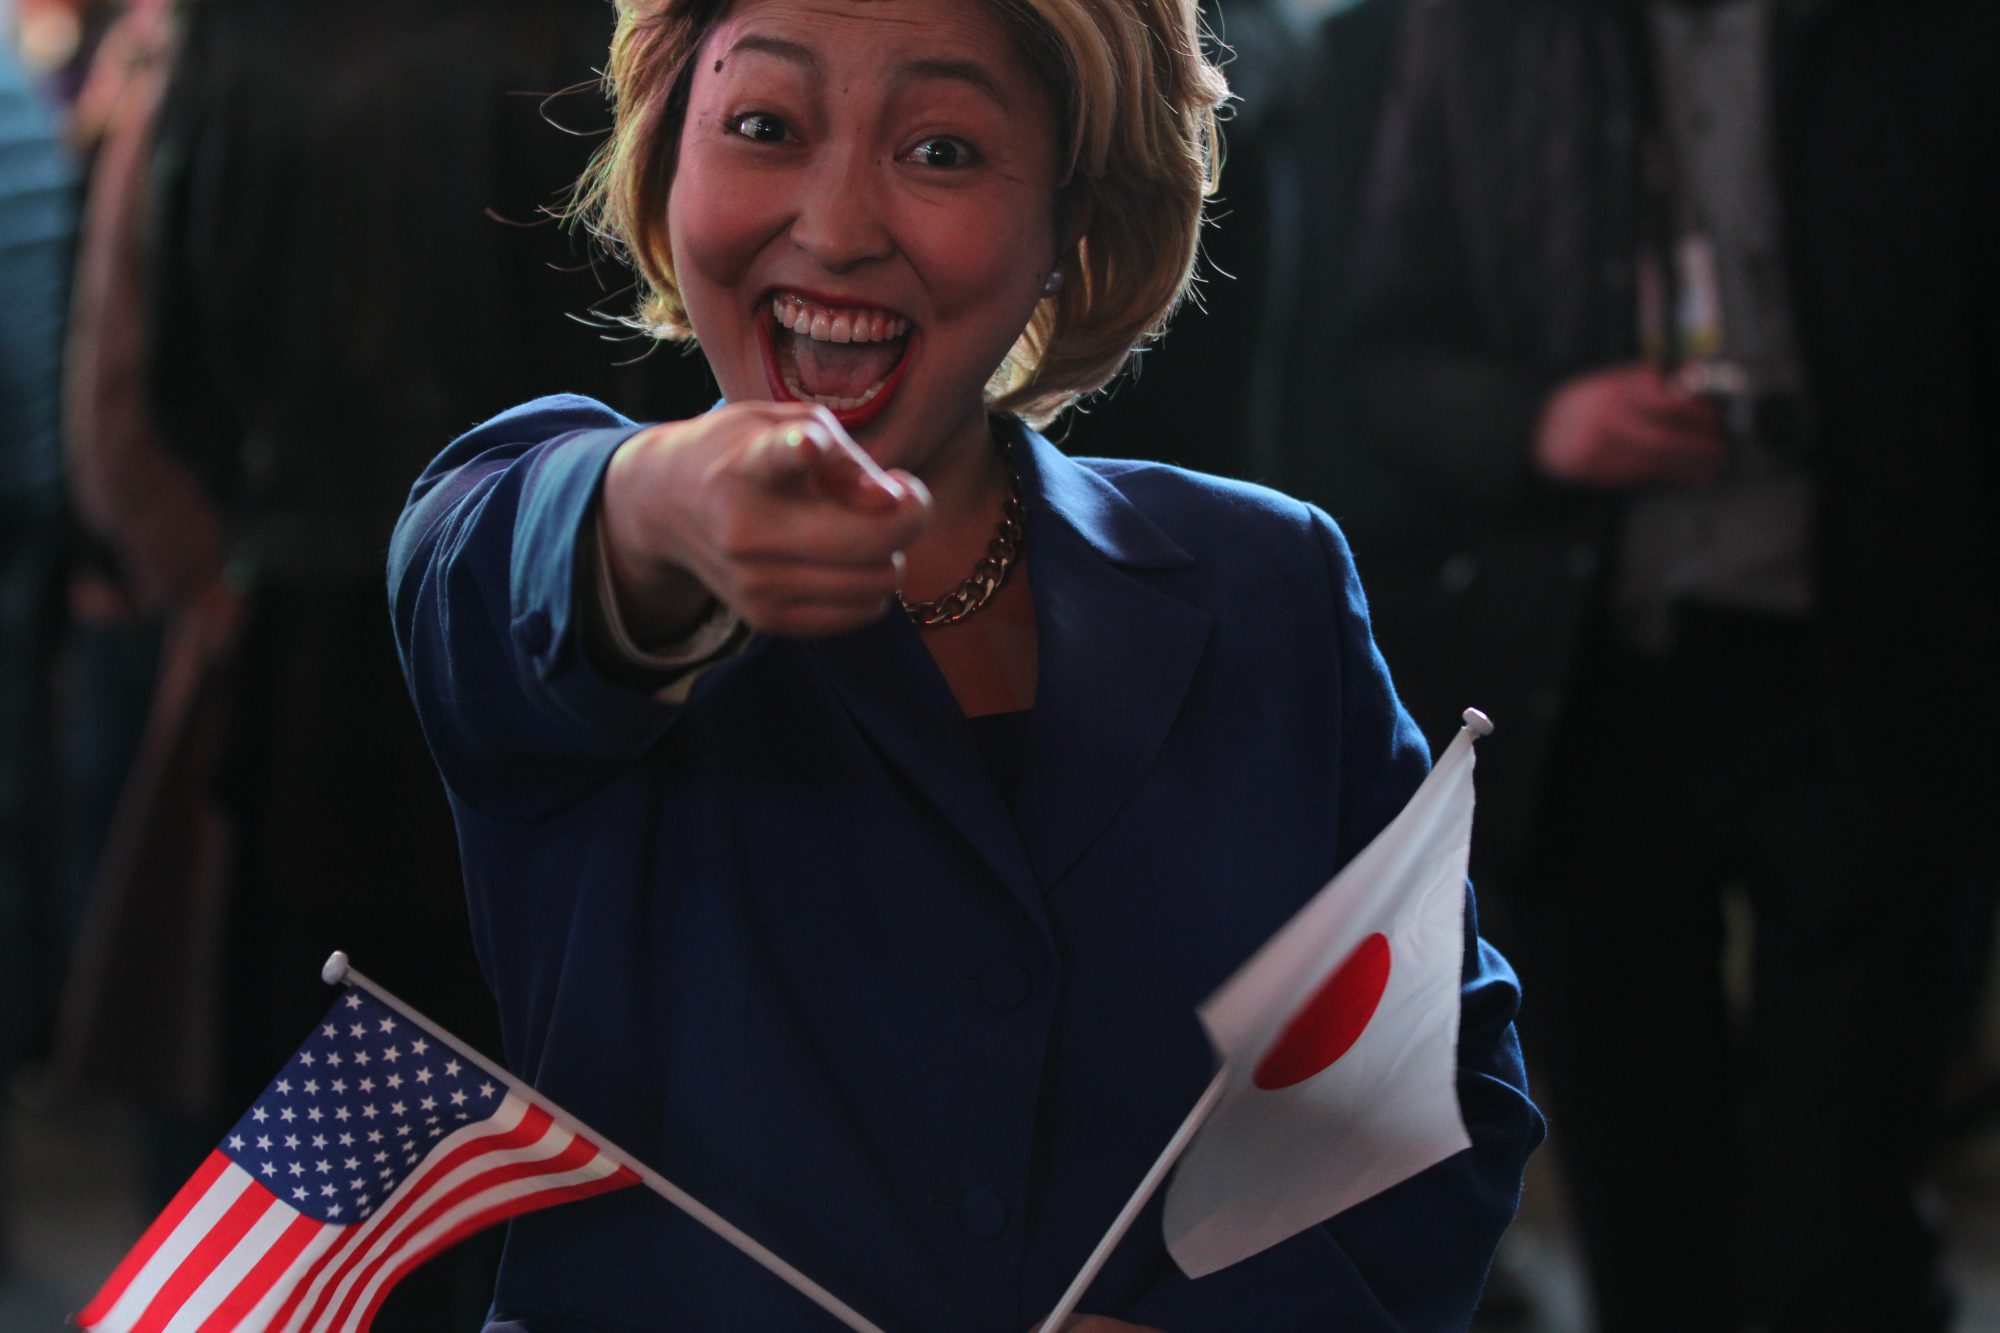 Earlier in the night, surrounded by hundreds of people in Times Square, a woman from Tokyo, Japan, dressed up as Democrat Hillary Clinton rallies enthusiasm among the crowd. (Rishika Dugyala/MNS)